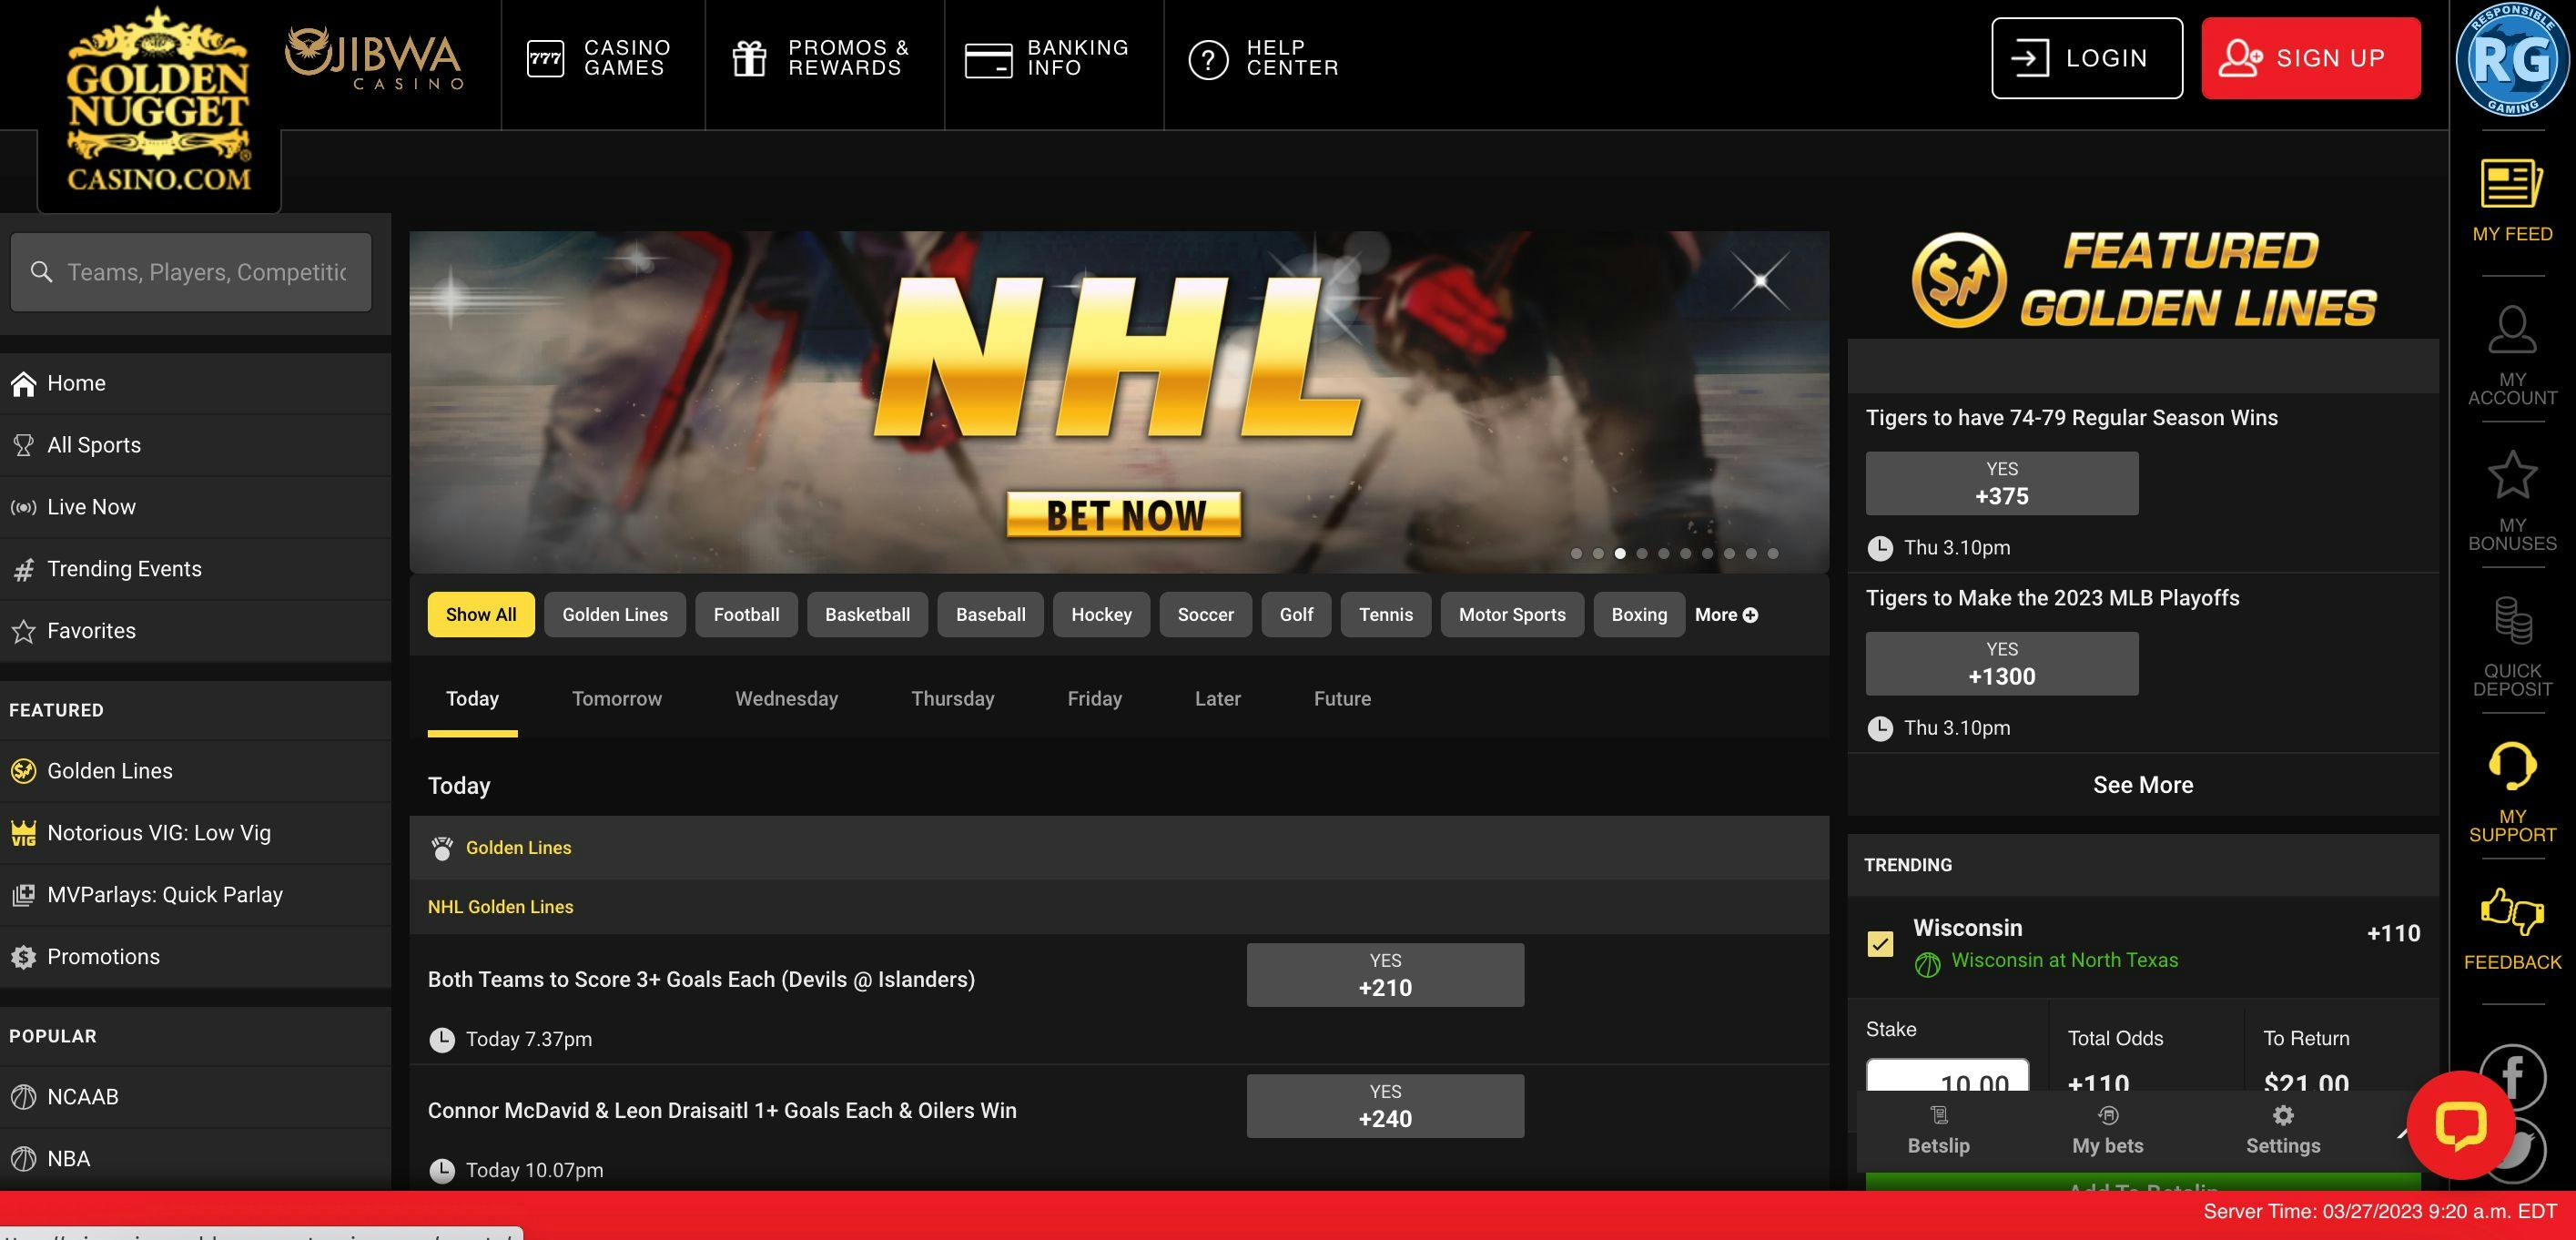 Image of the home page of Golden Nugget Sportsbook in Michigan